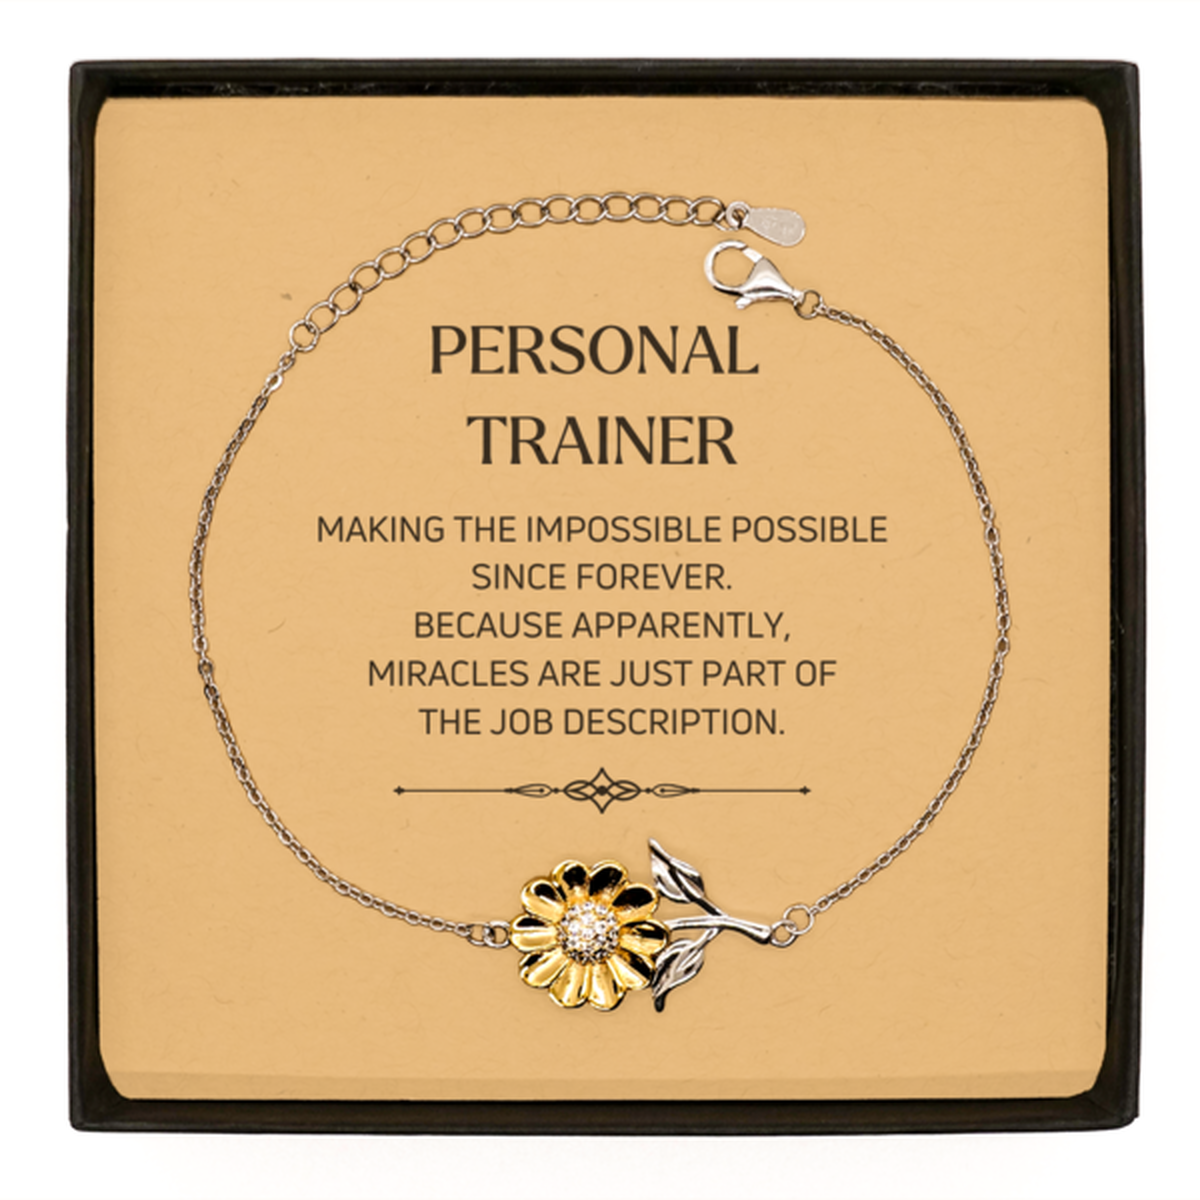 Funny Personal Trainer Gifts, Miracles are just part of the job description, Inspirational Birthday Sunflower Bracelet For Personal Trainer, Men, Women, Coworkers, Friends, Boss